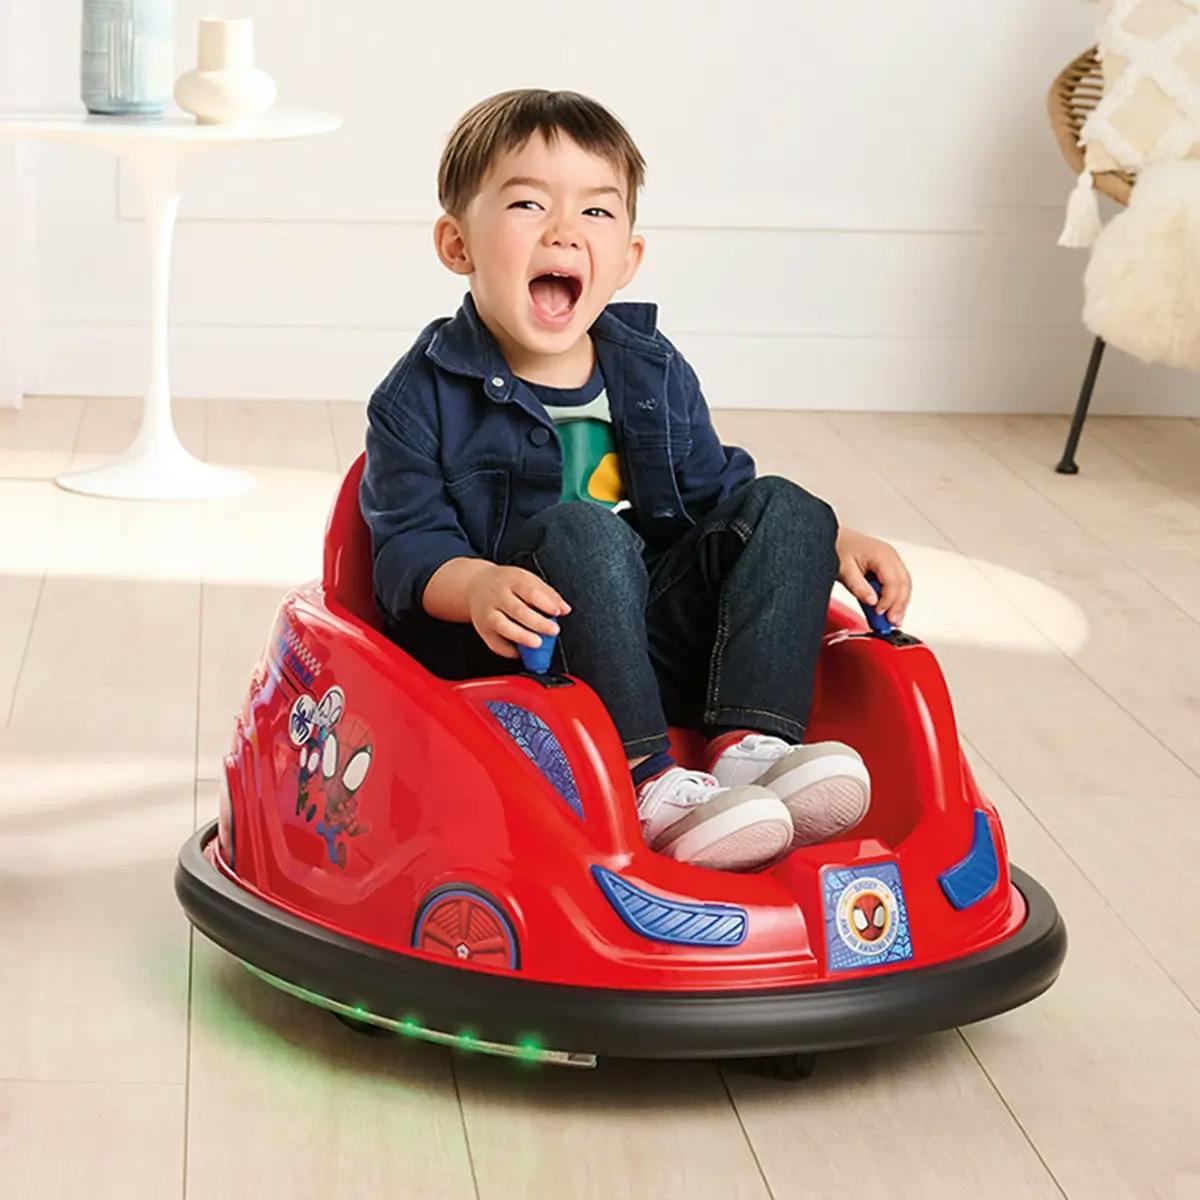 A battery-powered ride-on bumper car, part of the Blockbuster Hits section of the 20223 Walmart Top Toy Guide.